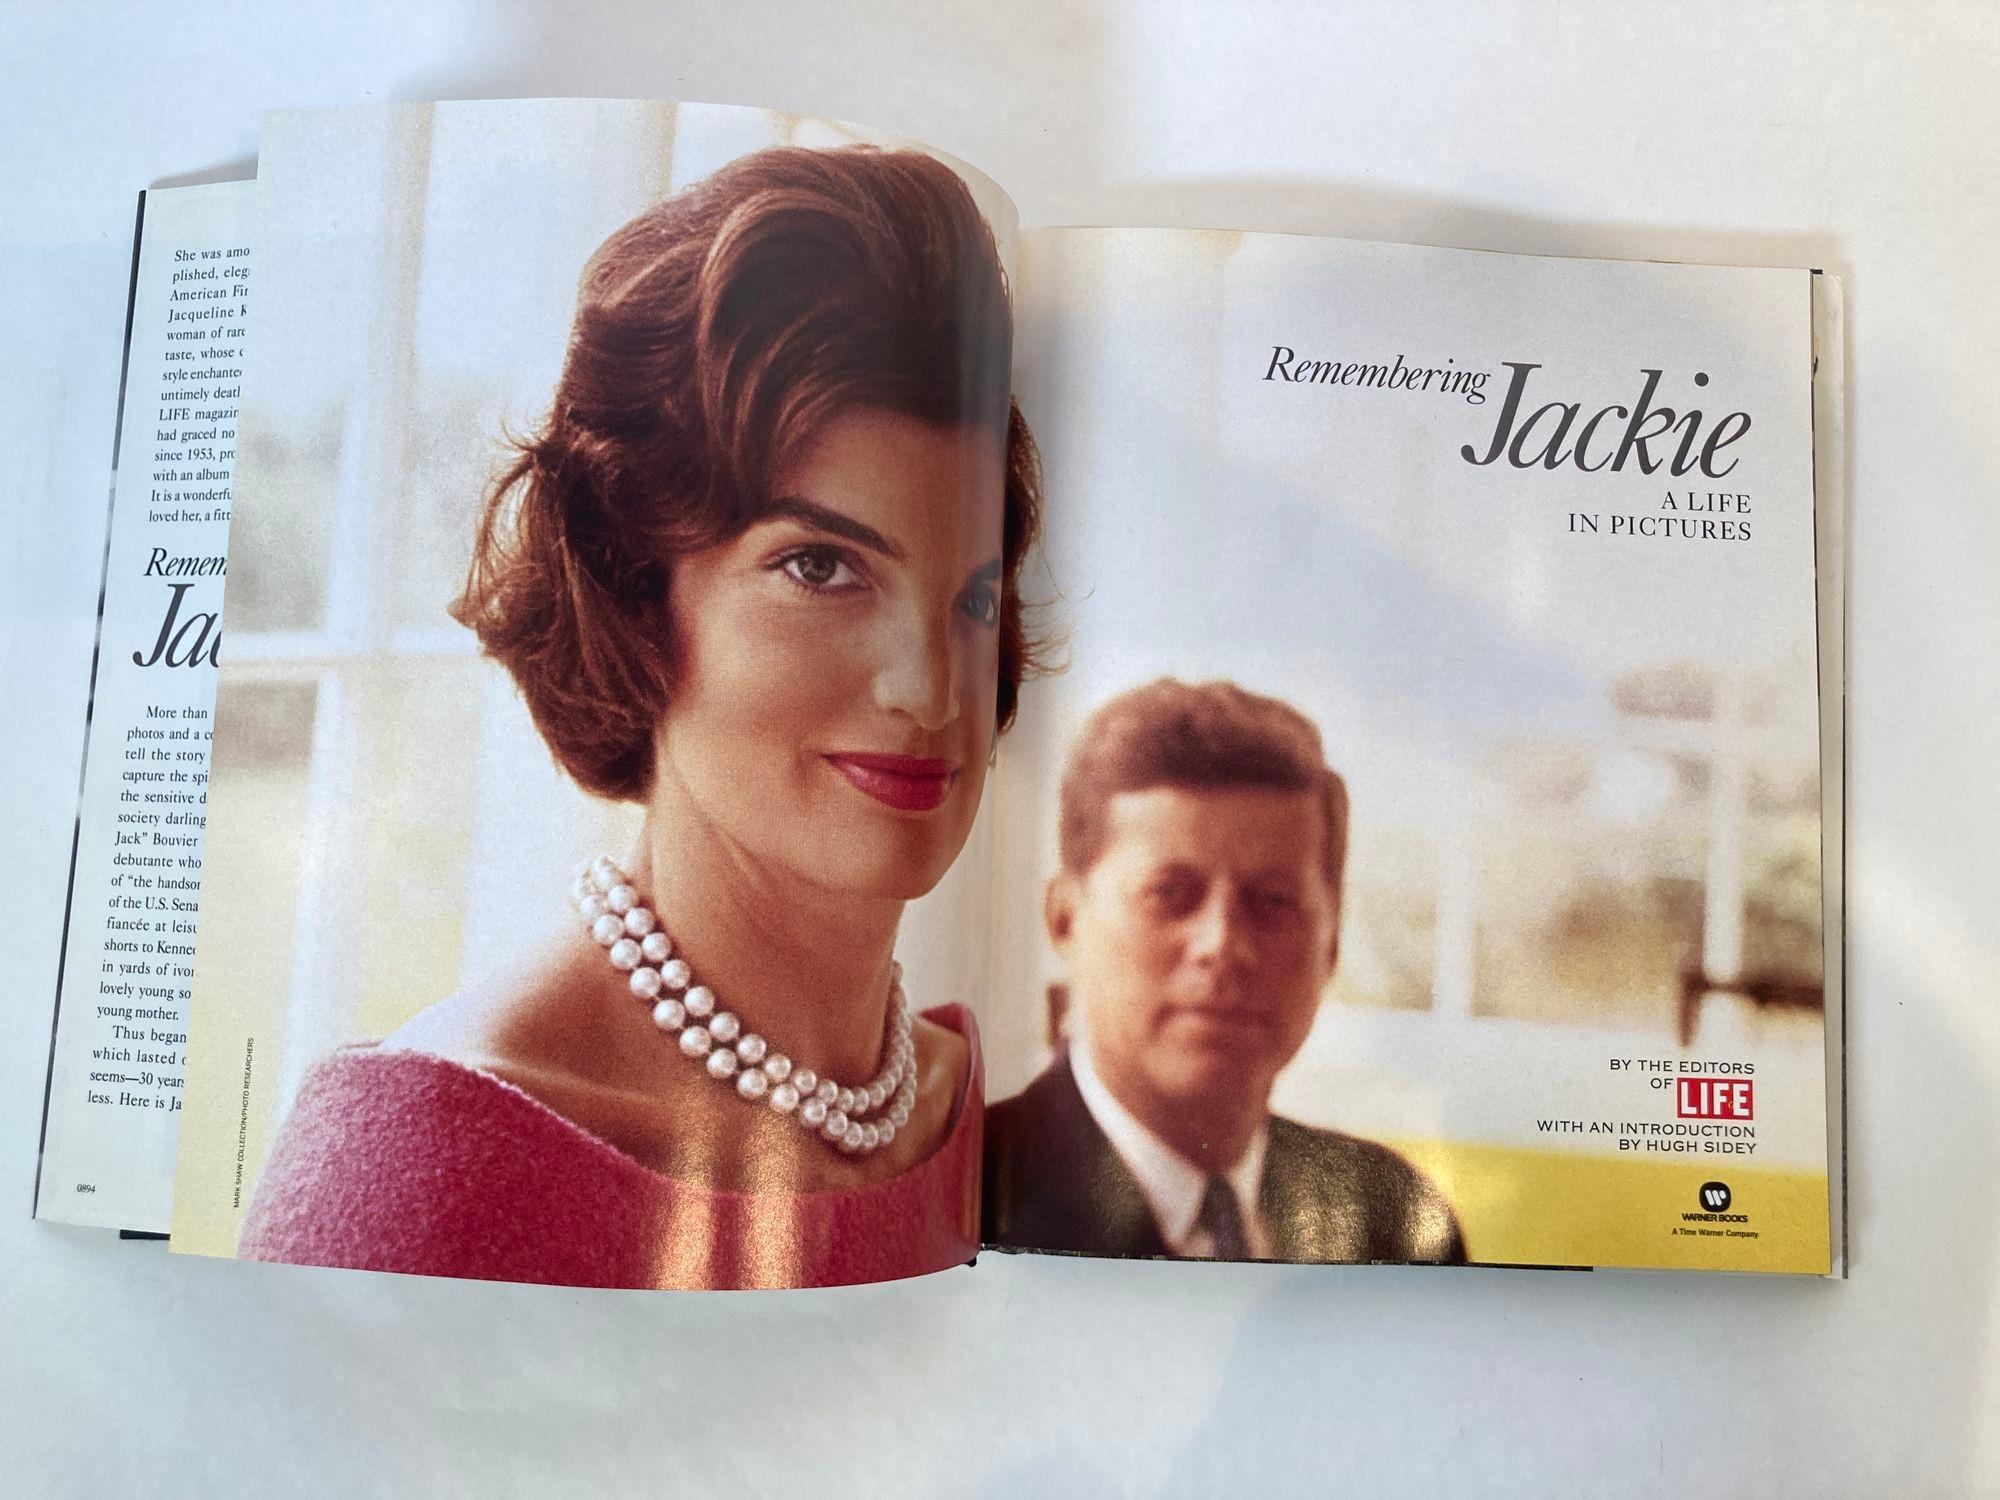 Remembering Jackie: A Life in Pictures Hardcover – January 1, 1994 by Life Magazine.
Uses photographs to trace the life of the former first lady, including her childhood, marriage, family life, White House years, and second marriage.

* Publisher